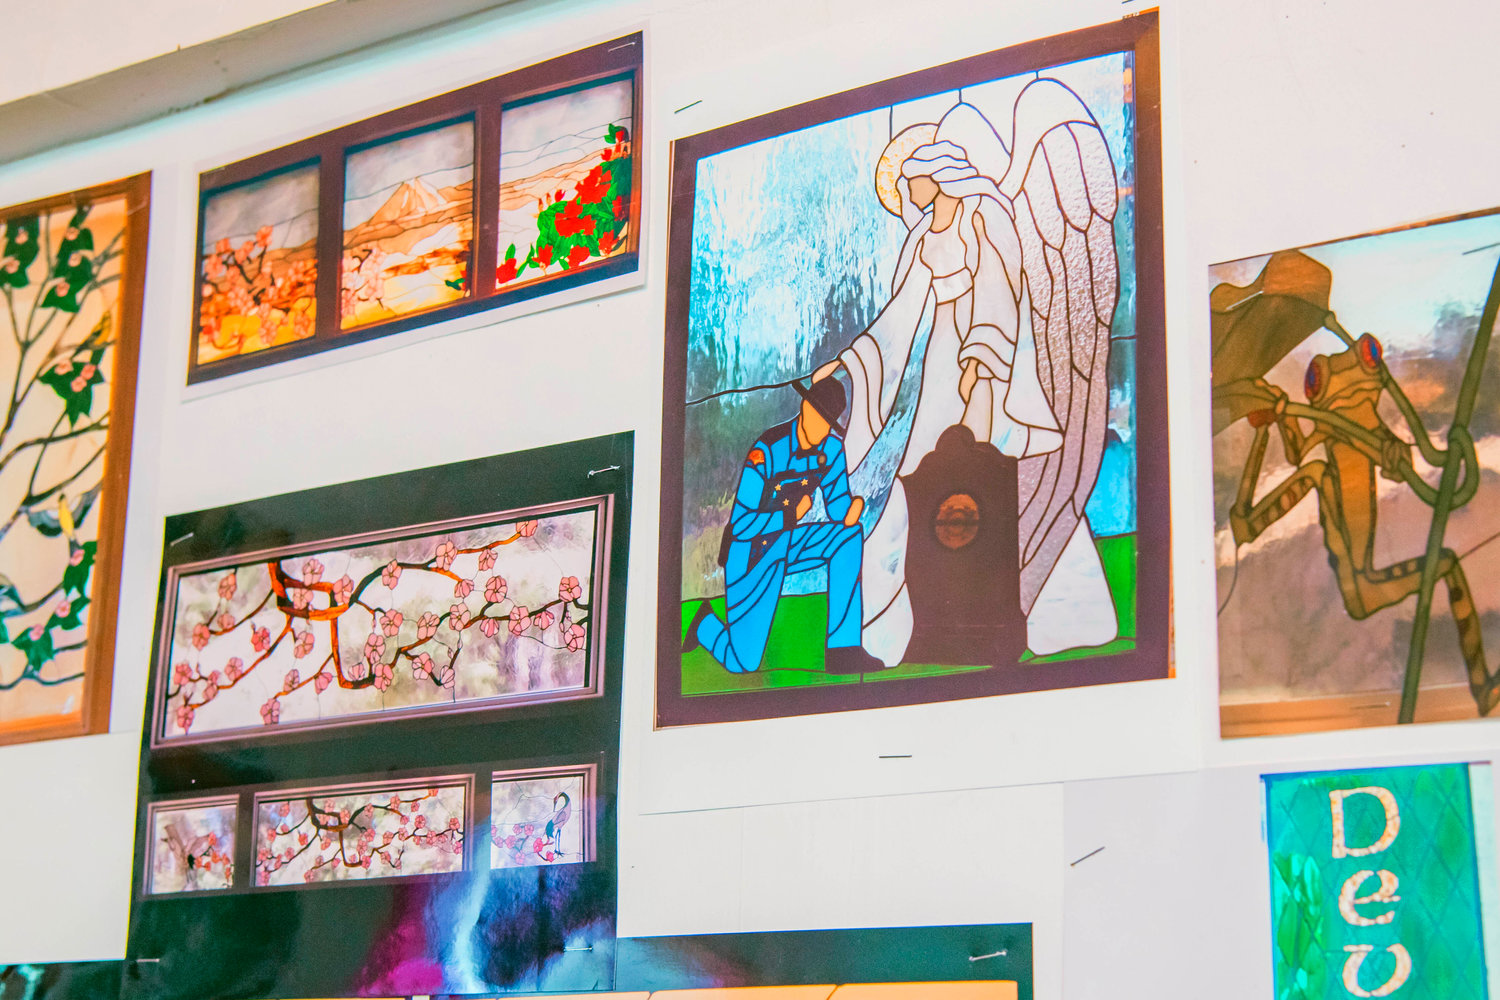 Images of stained glass pieces hang on display inside Marcy Anholt’s studio.